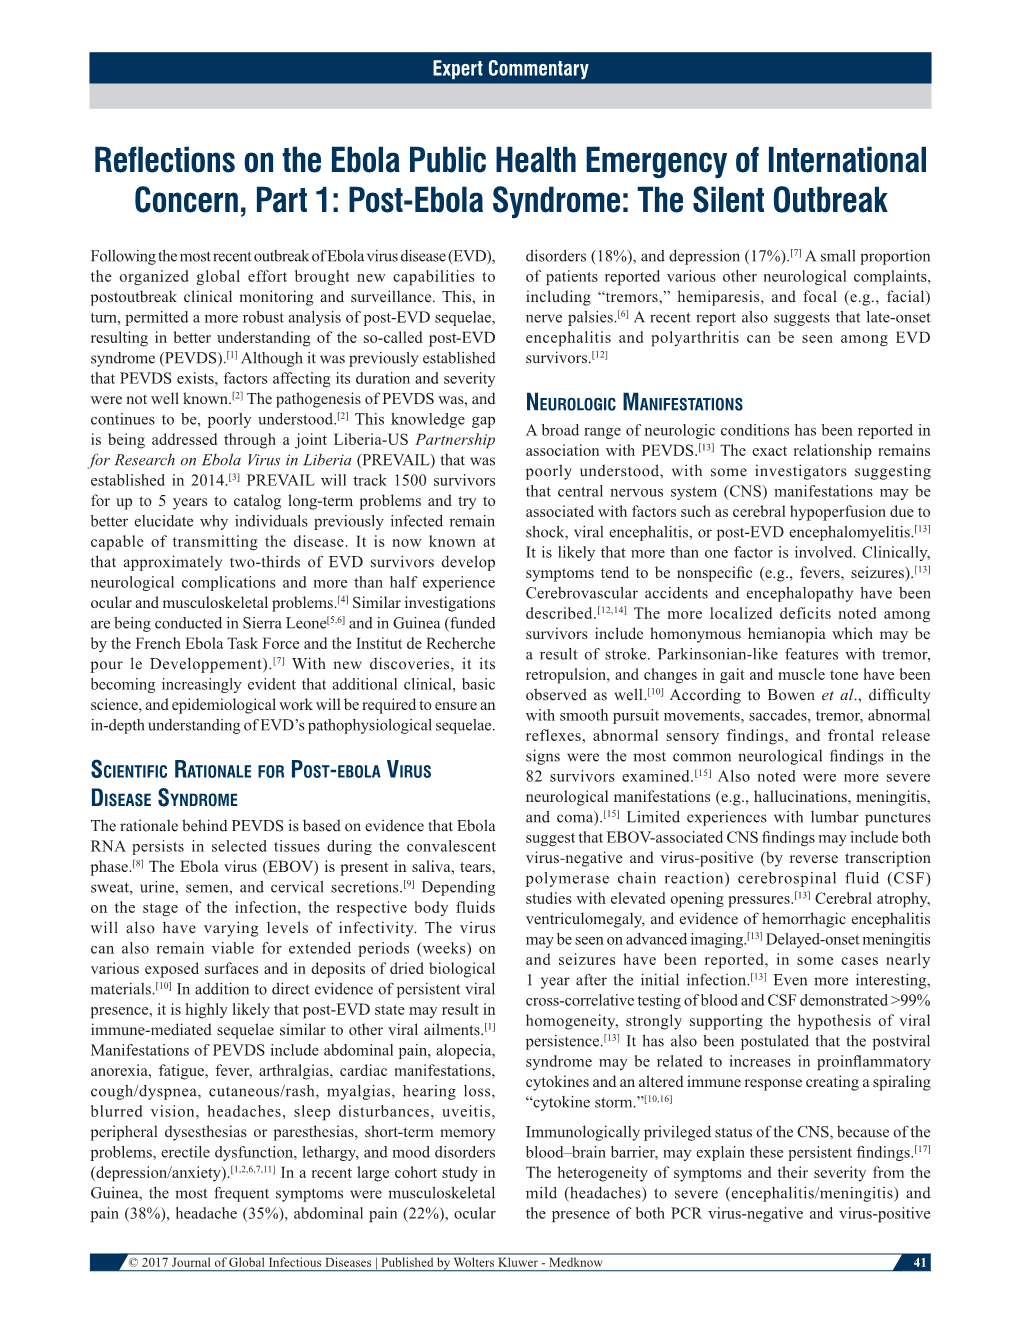 Post‑Ebola Syndrome: the Silent Outbreak